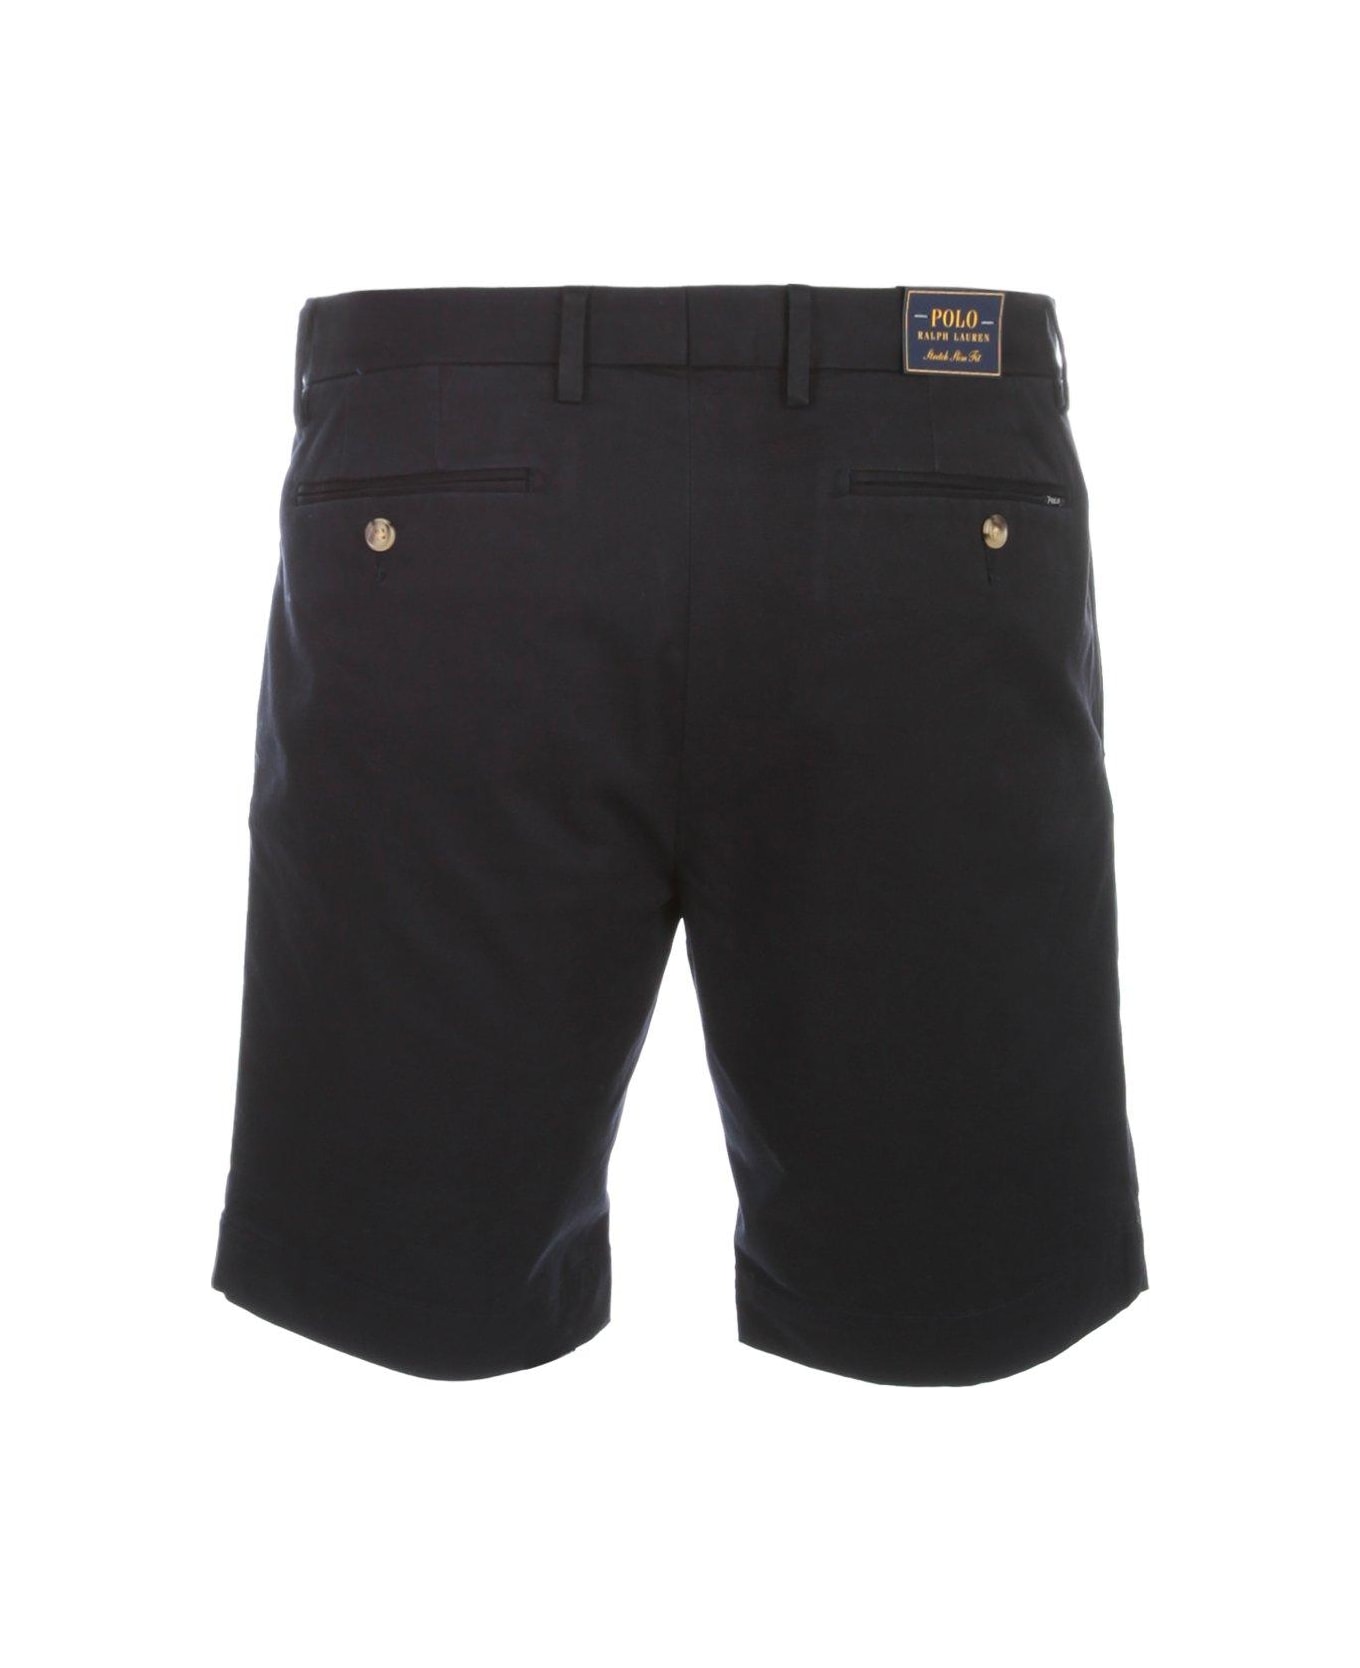 Polo Ralph Lauren Fitted Chino Shorts - Blue